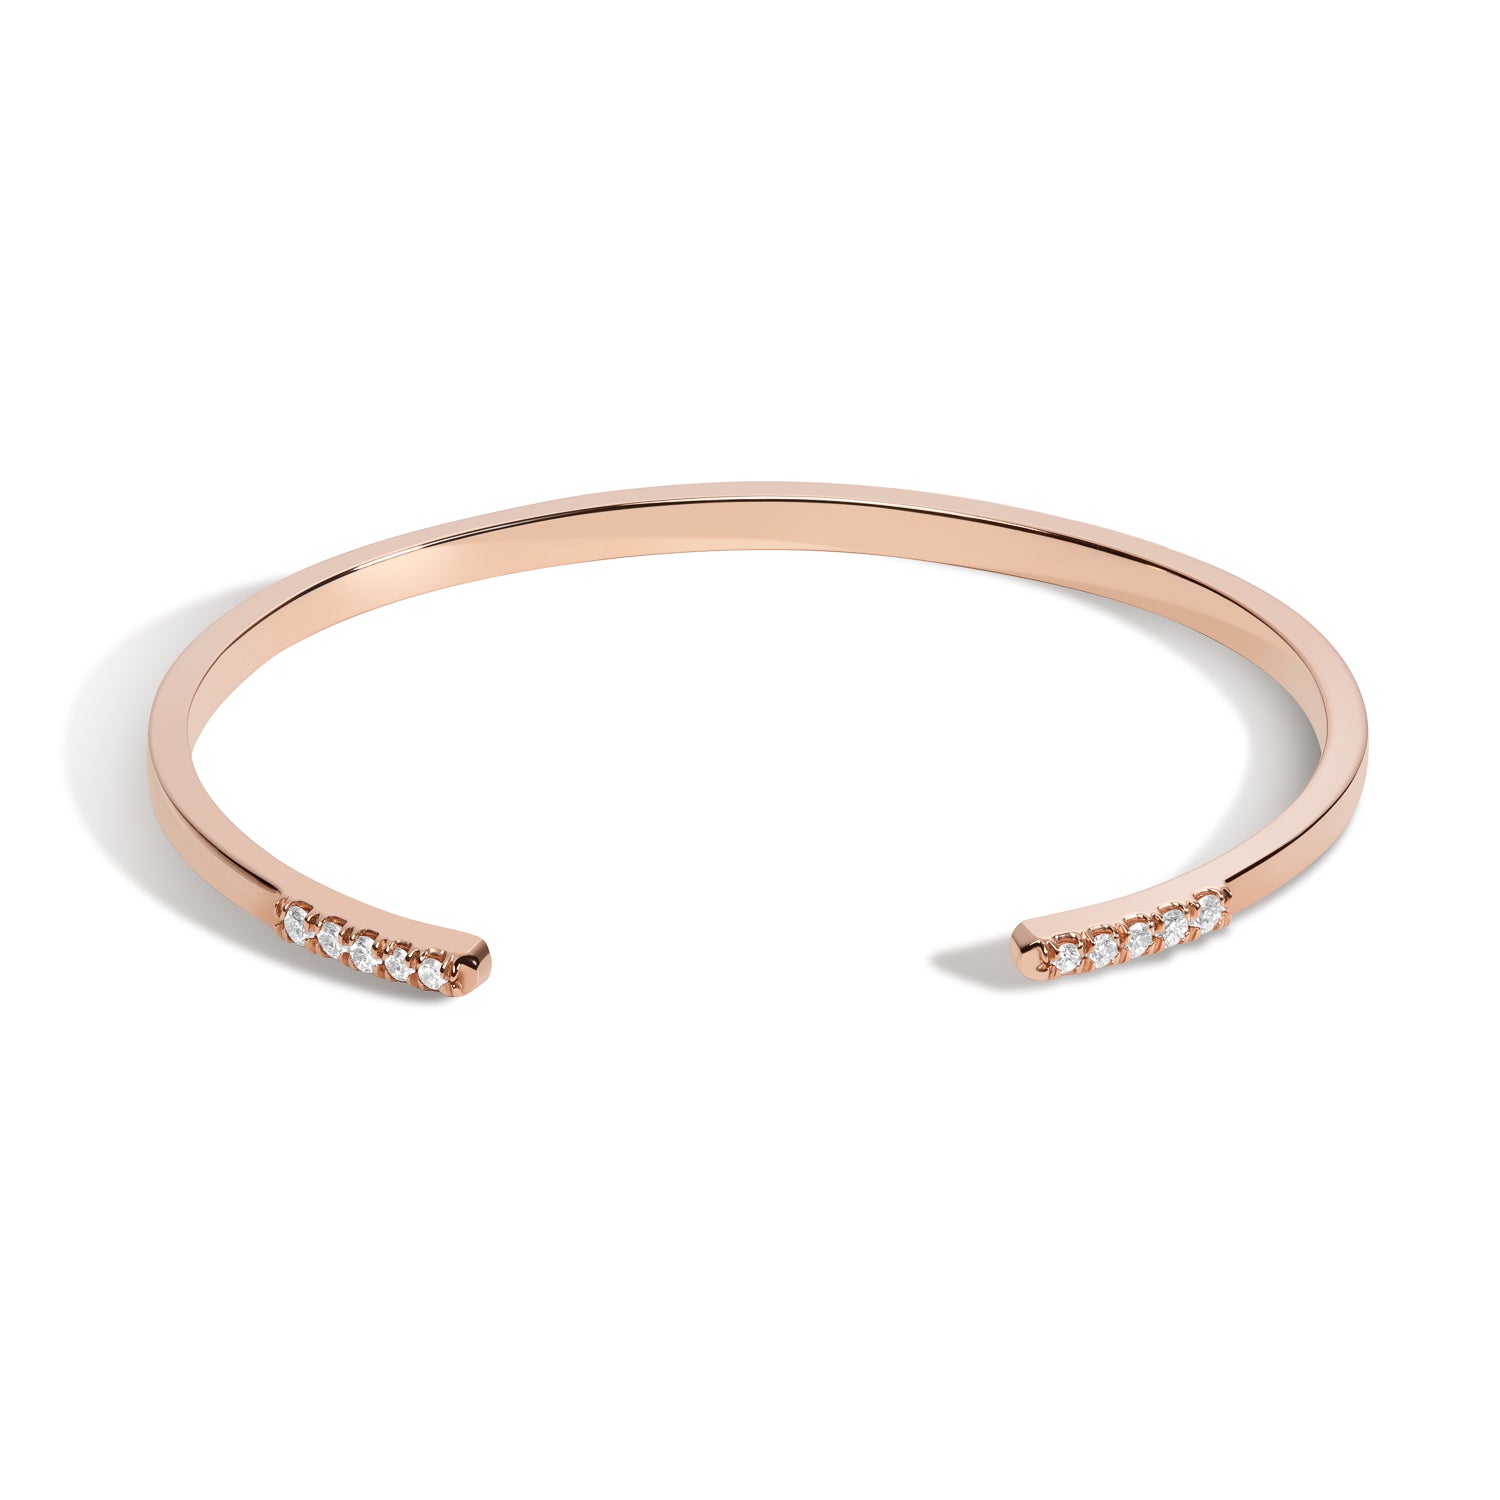 Shahla Karimi Jewelry Landmark Collection Central Park Cuff 14K Rose Gold w/ White Gold